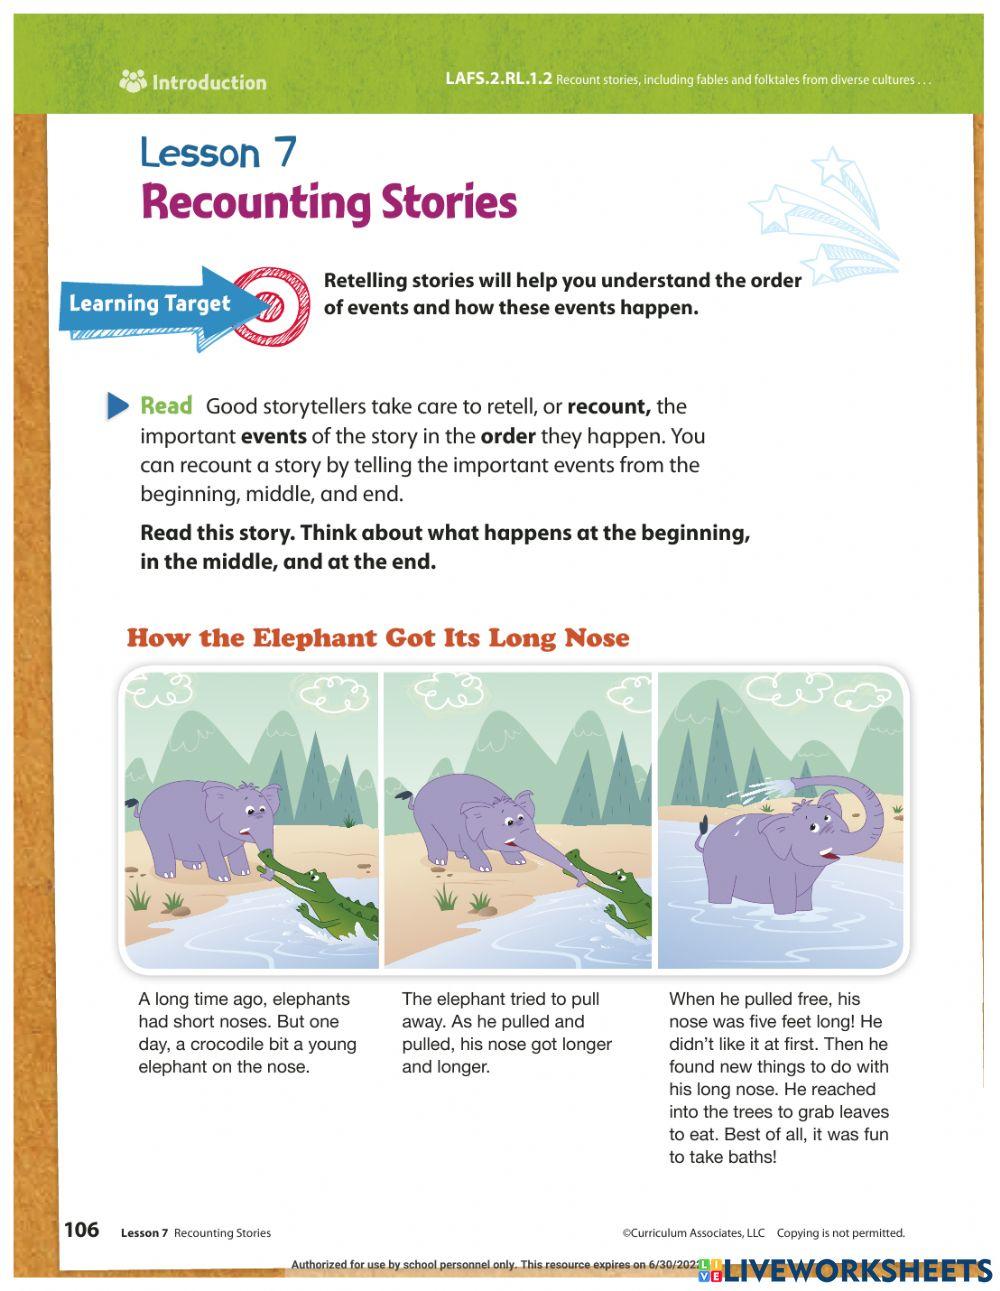 Intro to Recounting Stories